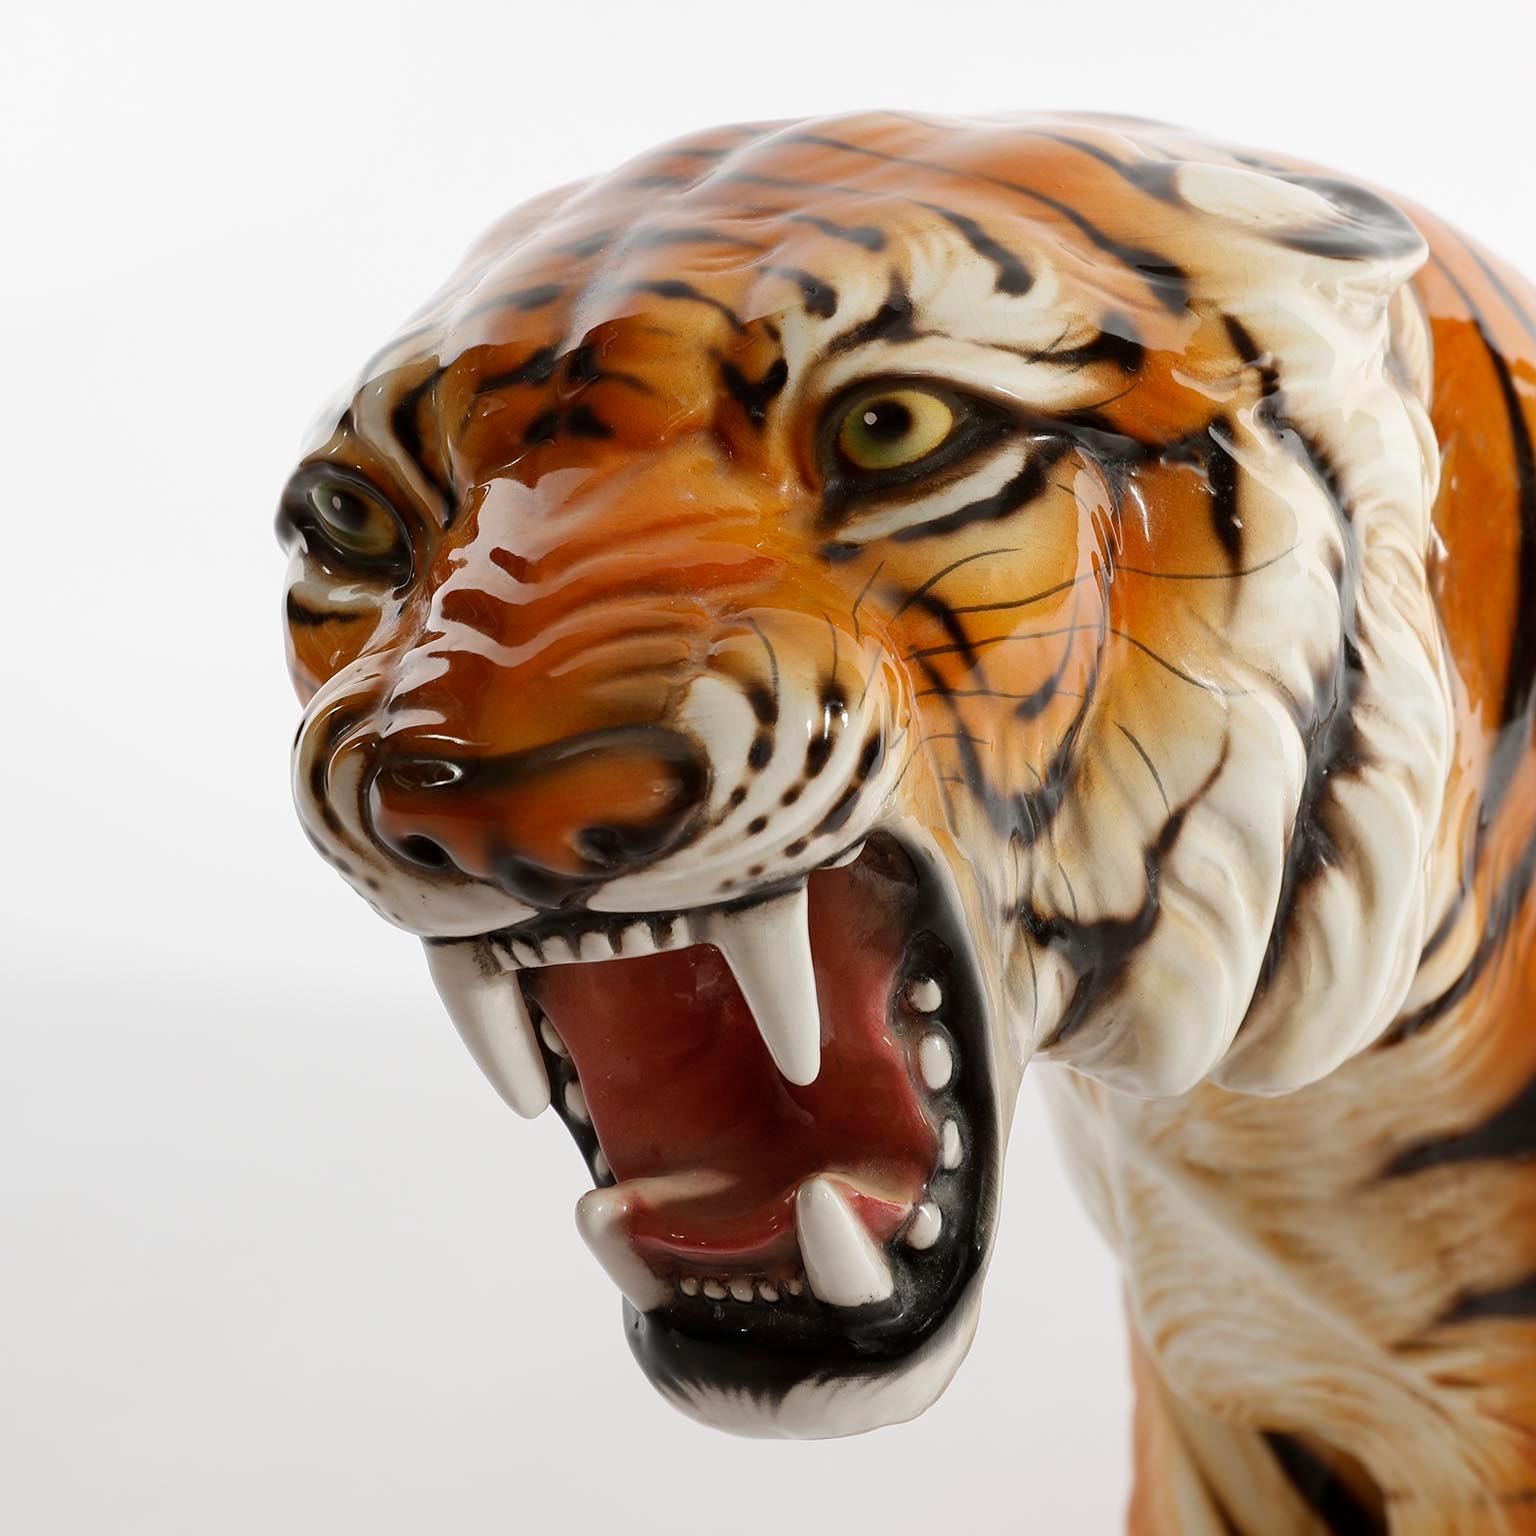 Glazed Mid-Century Modern Ceramic Tiger by Ronzan, Italy, 1950s For Sale